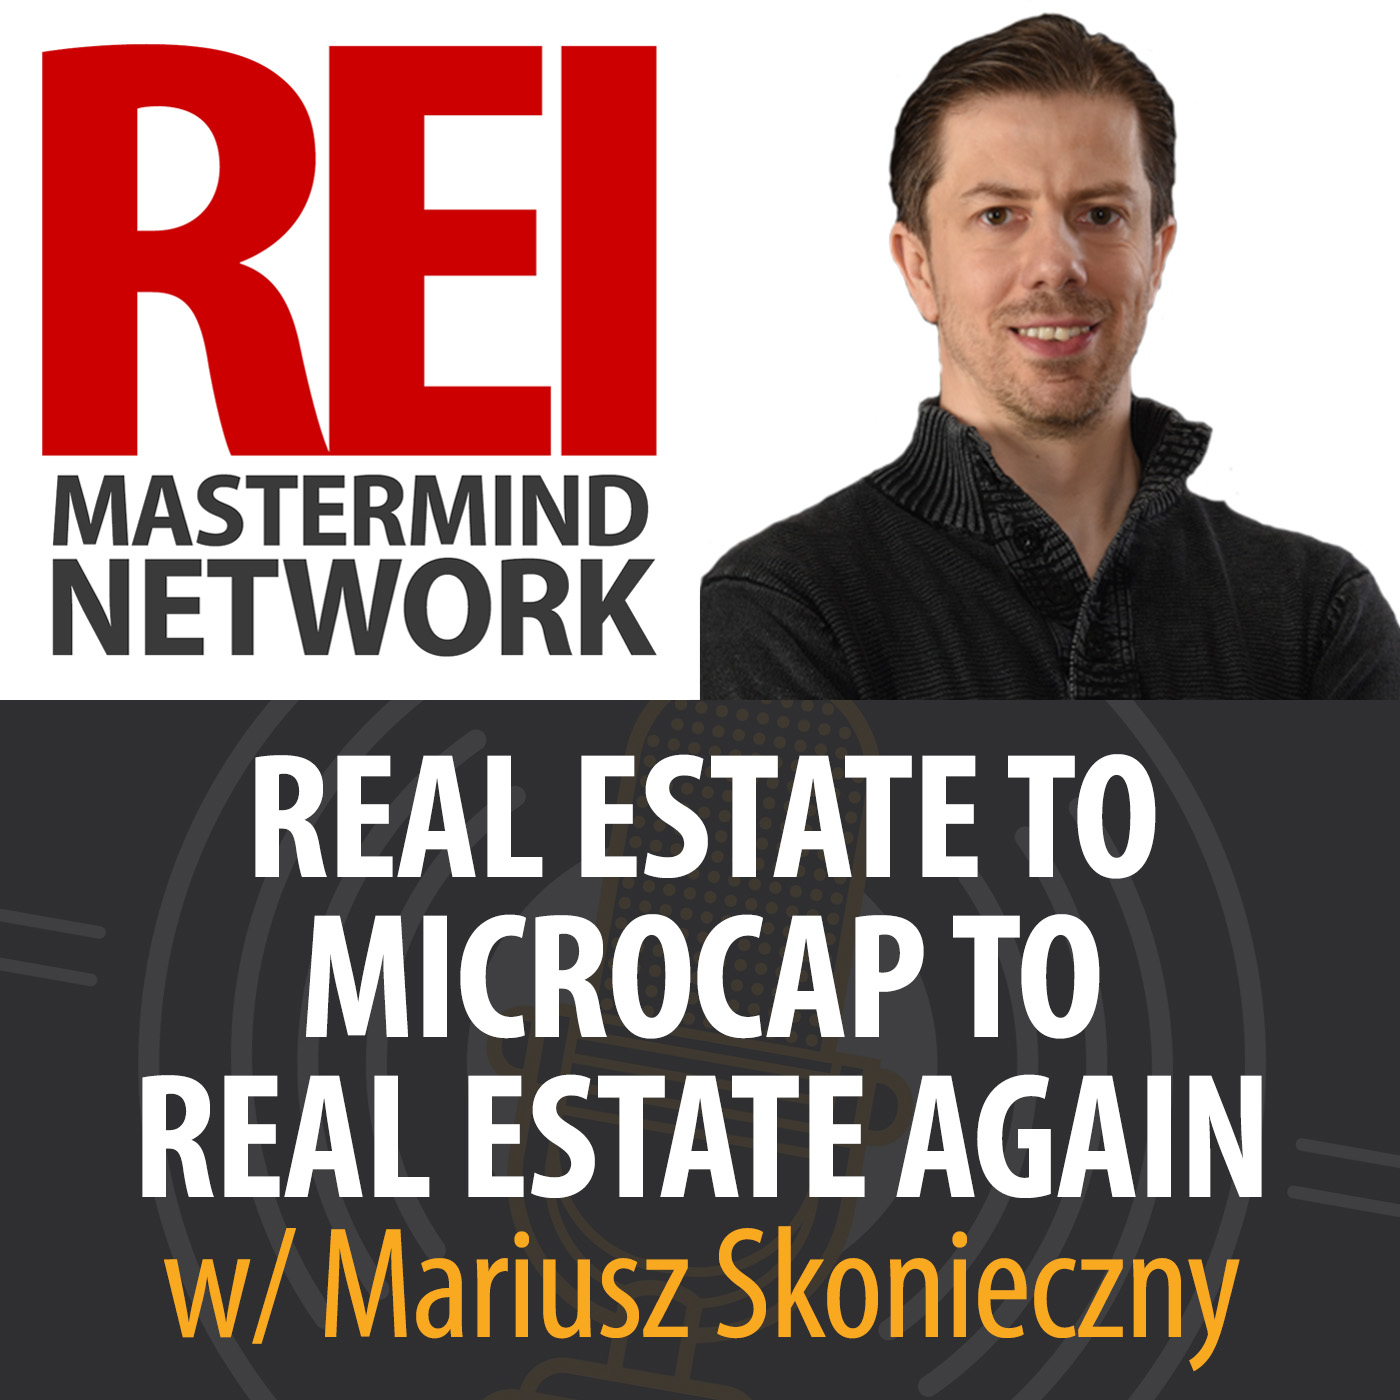 Real Estate to MicroCap Investing to Real Estate Again with Mariusz Skonieczny